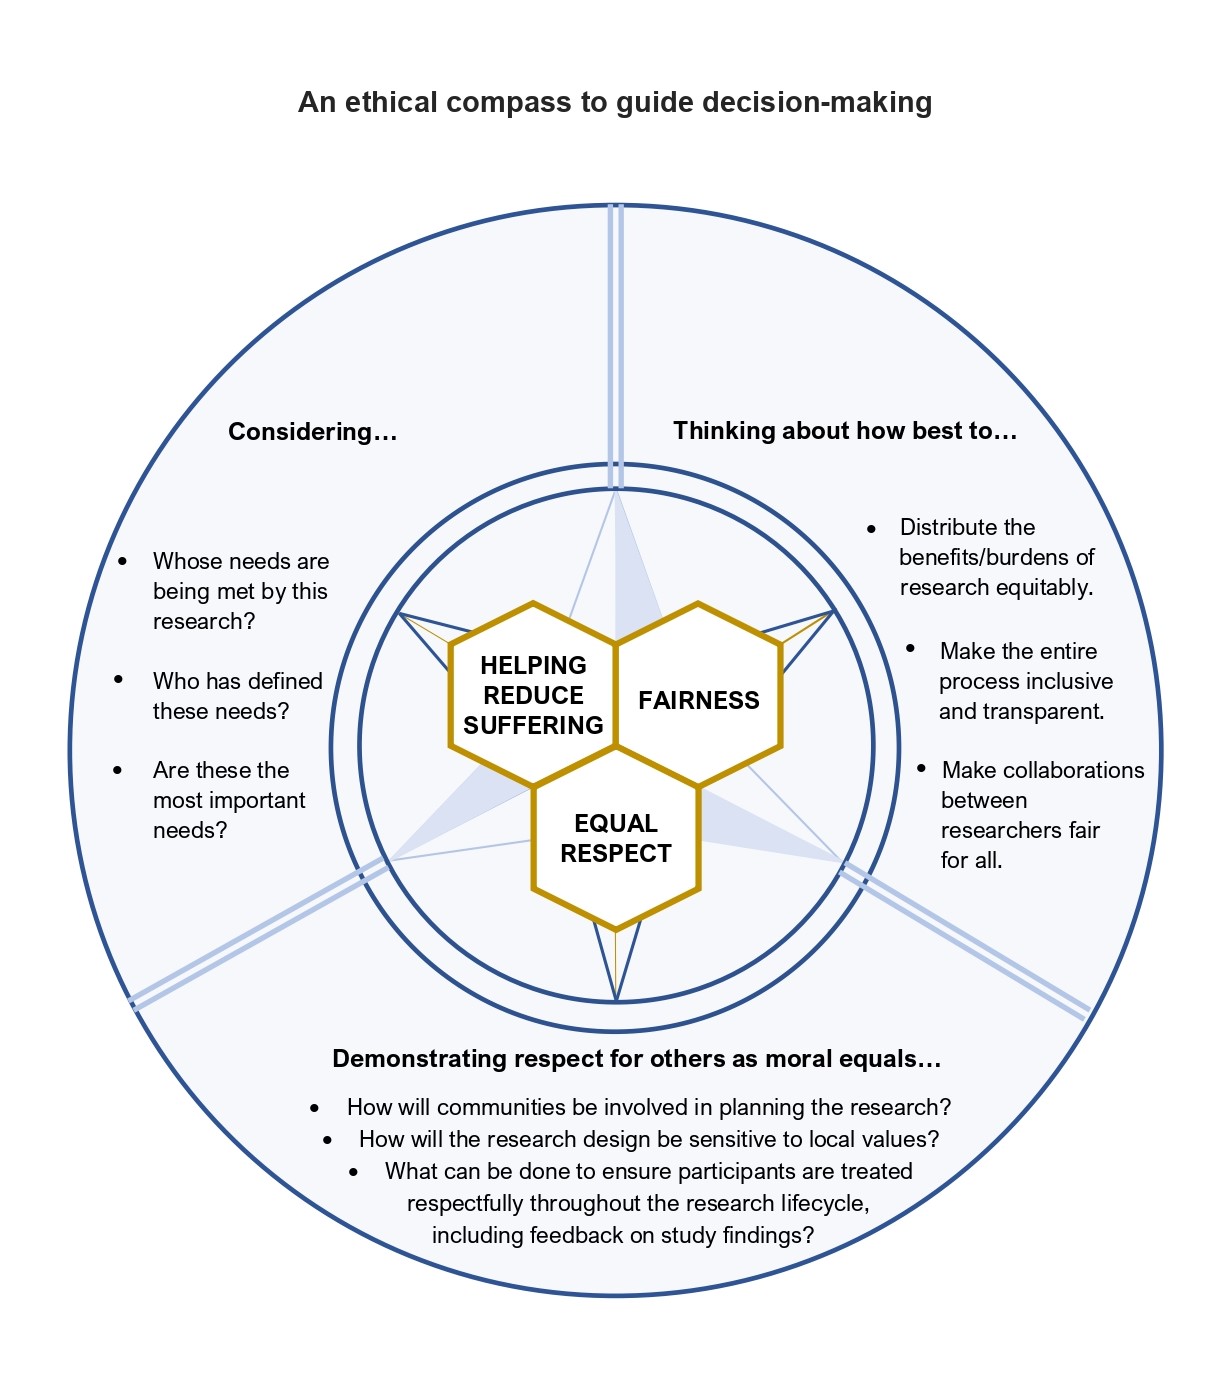 An ethical compass to guide decision-making